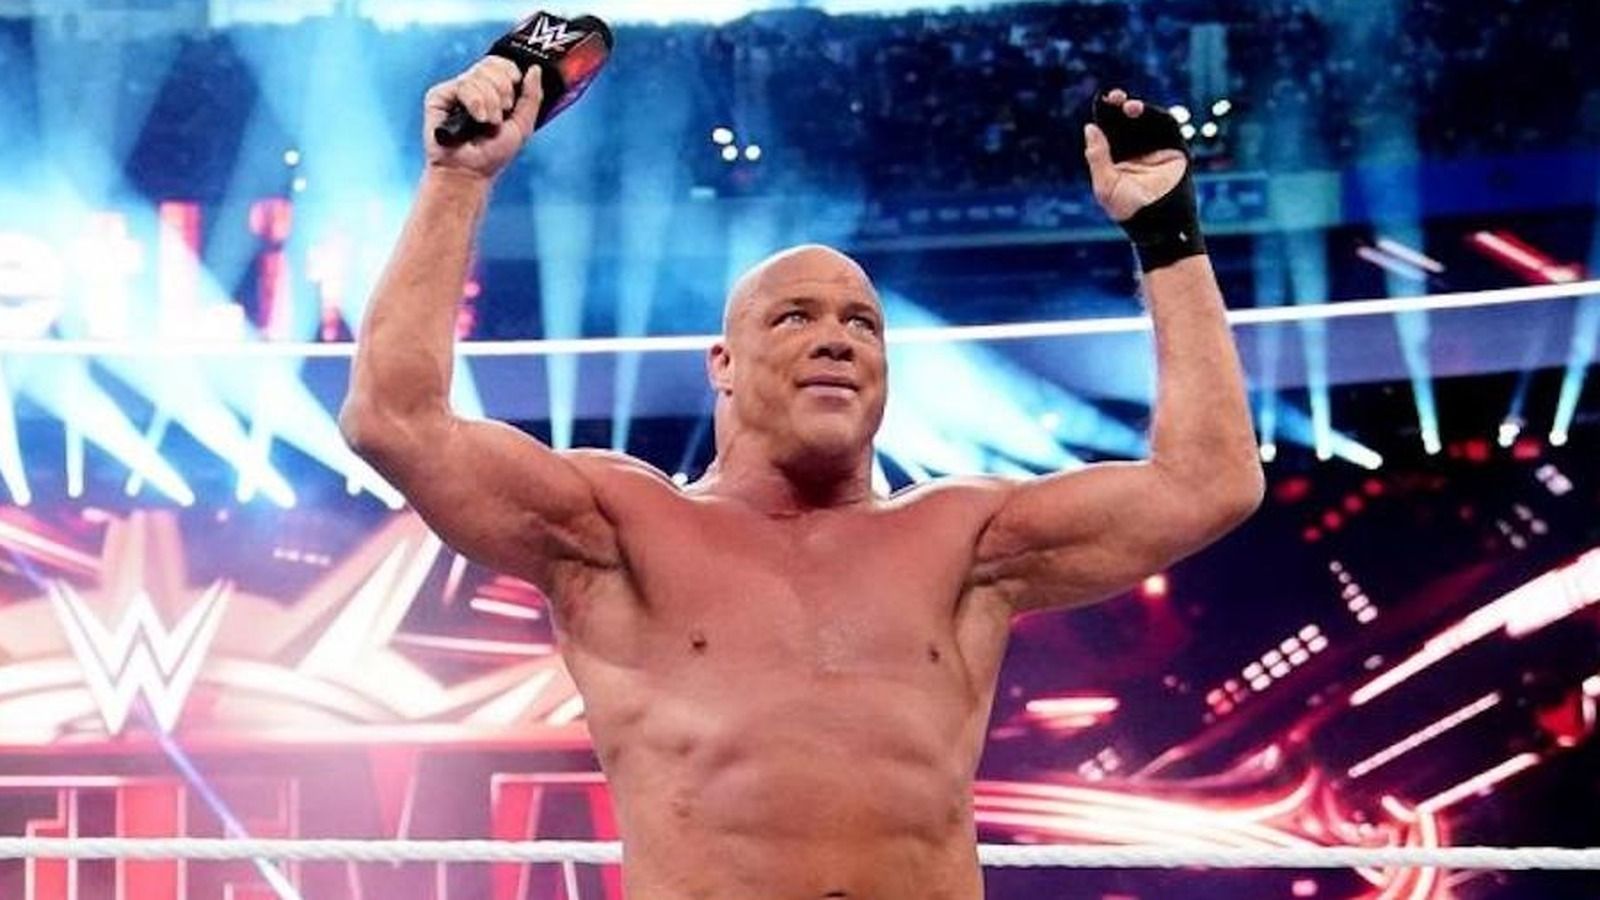 Will Kurt Angle return for another match in WWE?